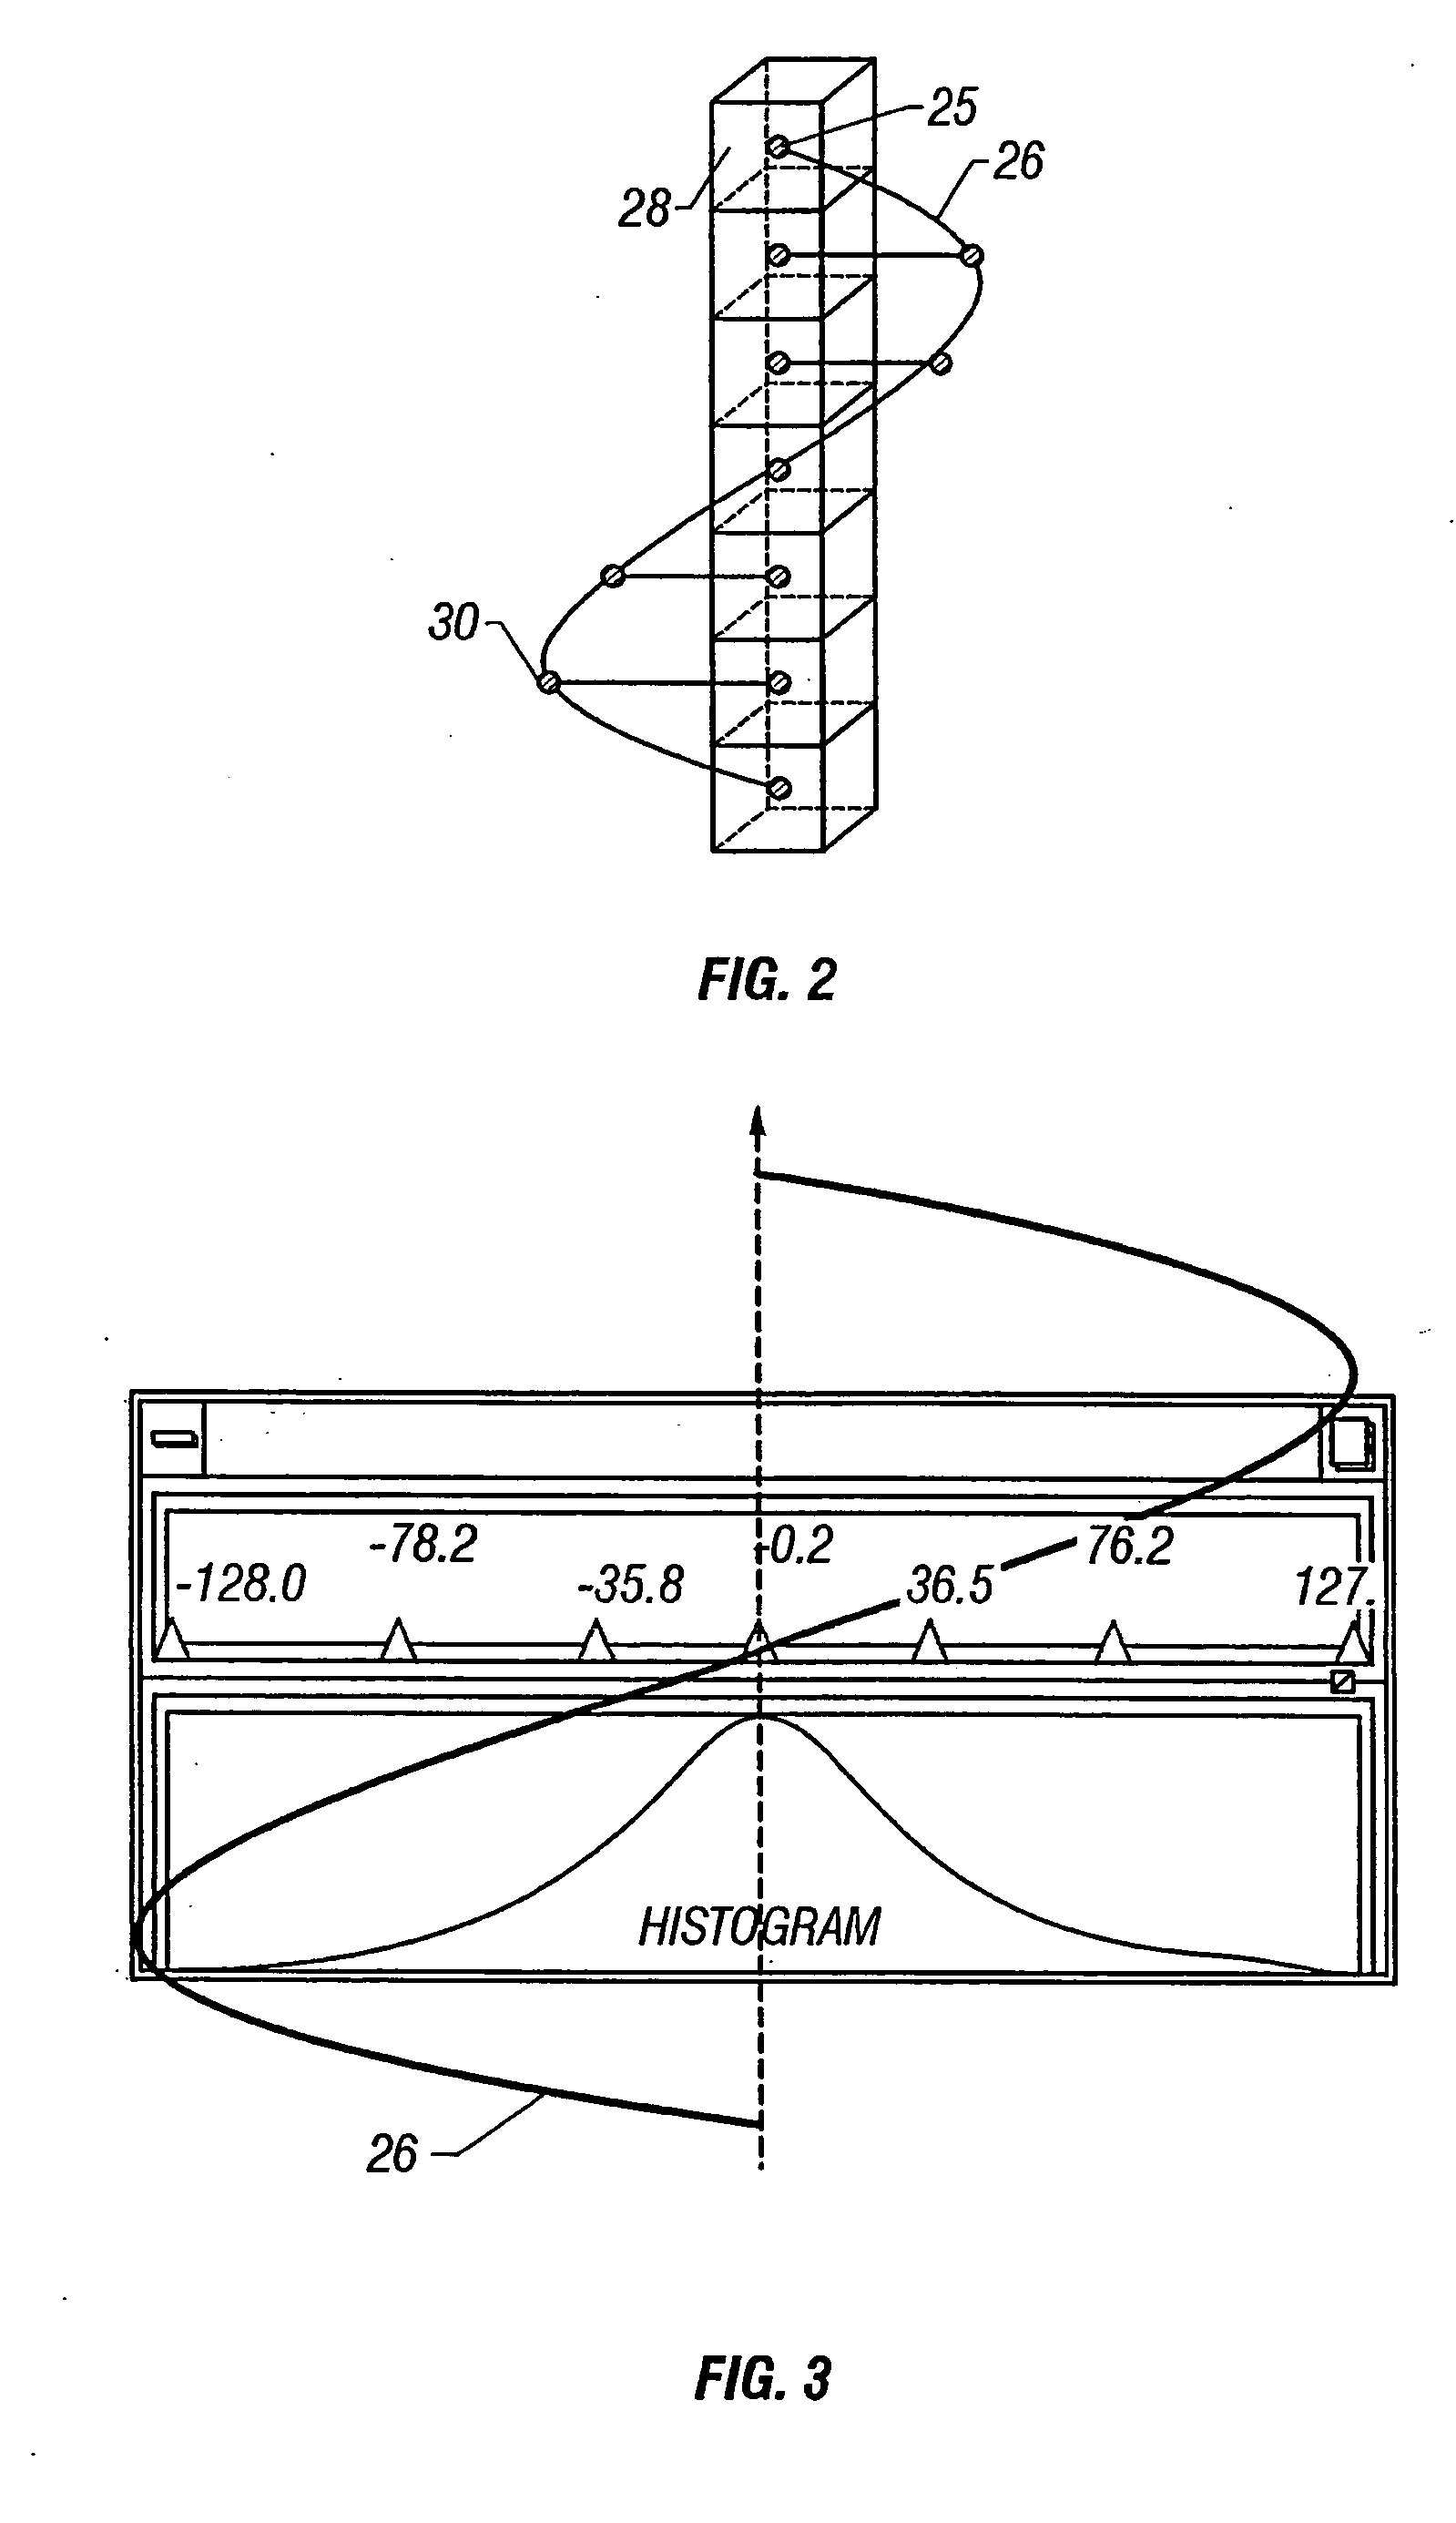 System and method for analyzing and imaging an enhanced three-dimensional volume data set using one or more attributes